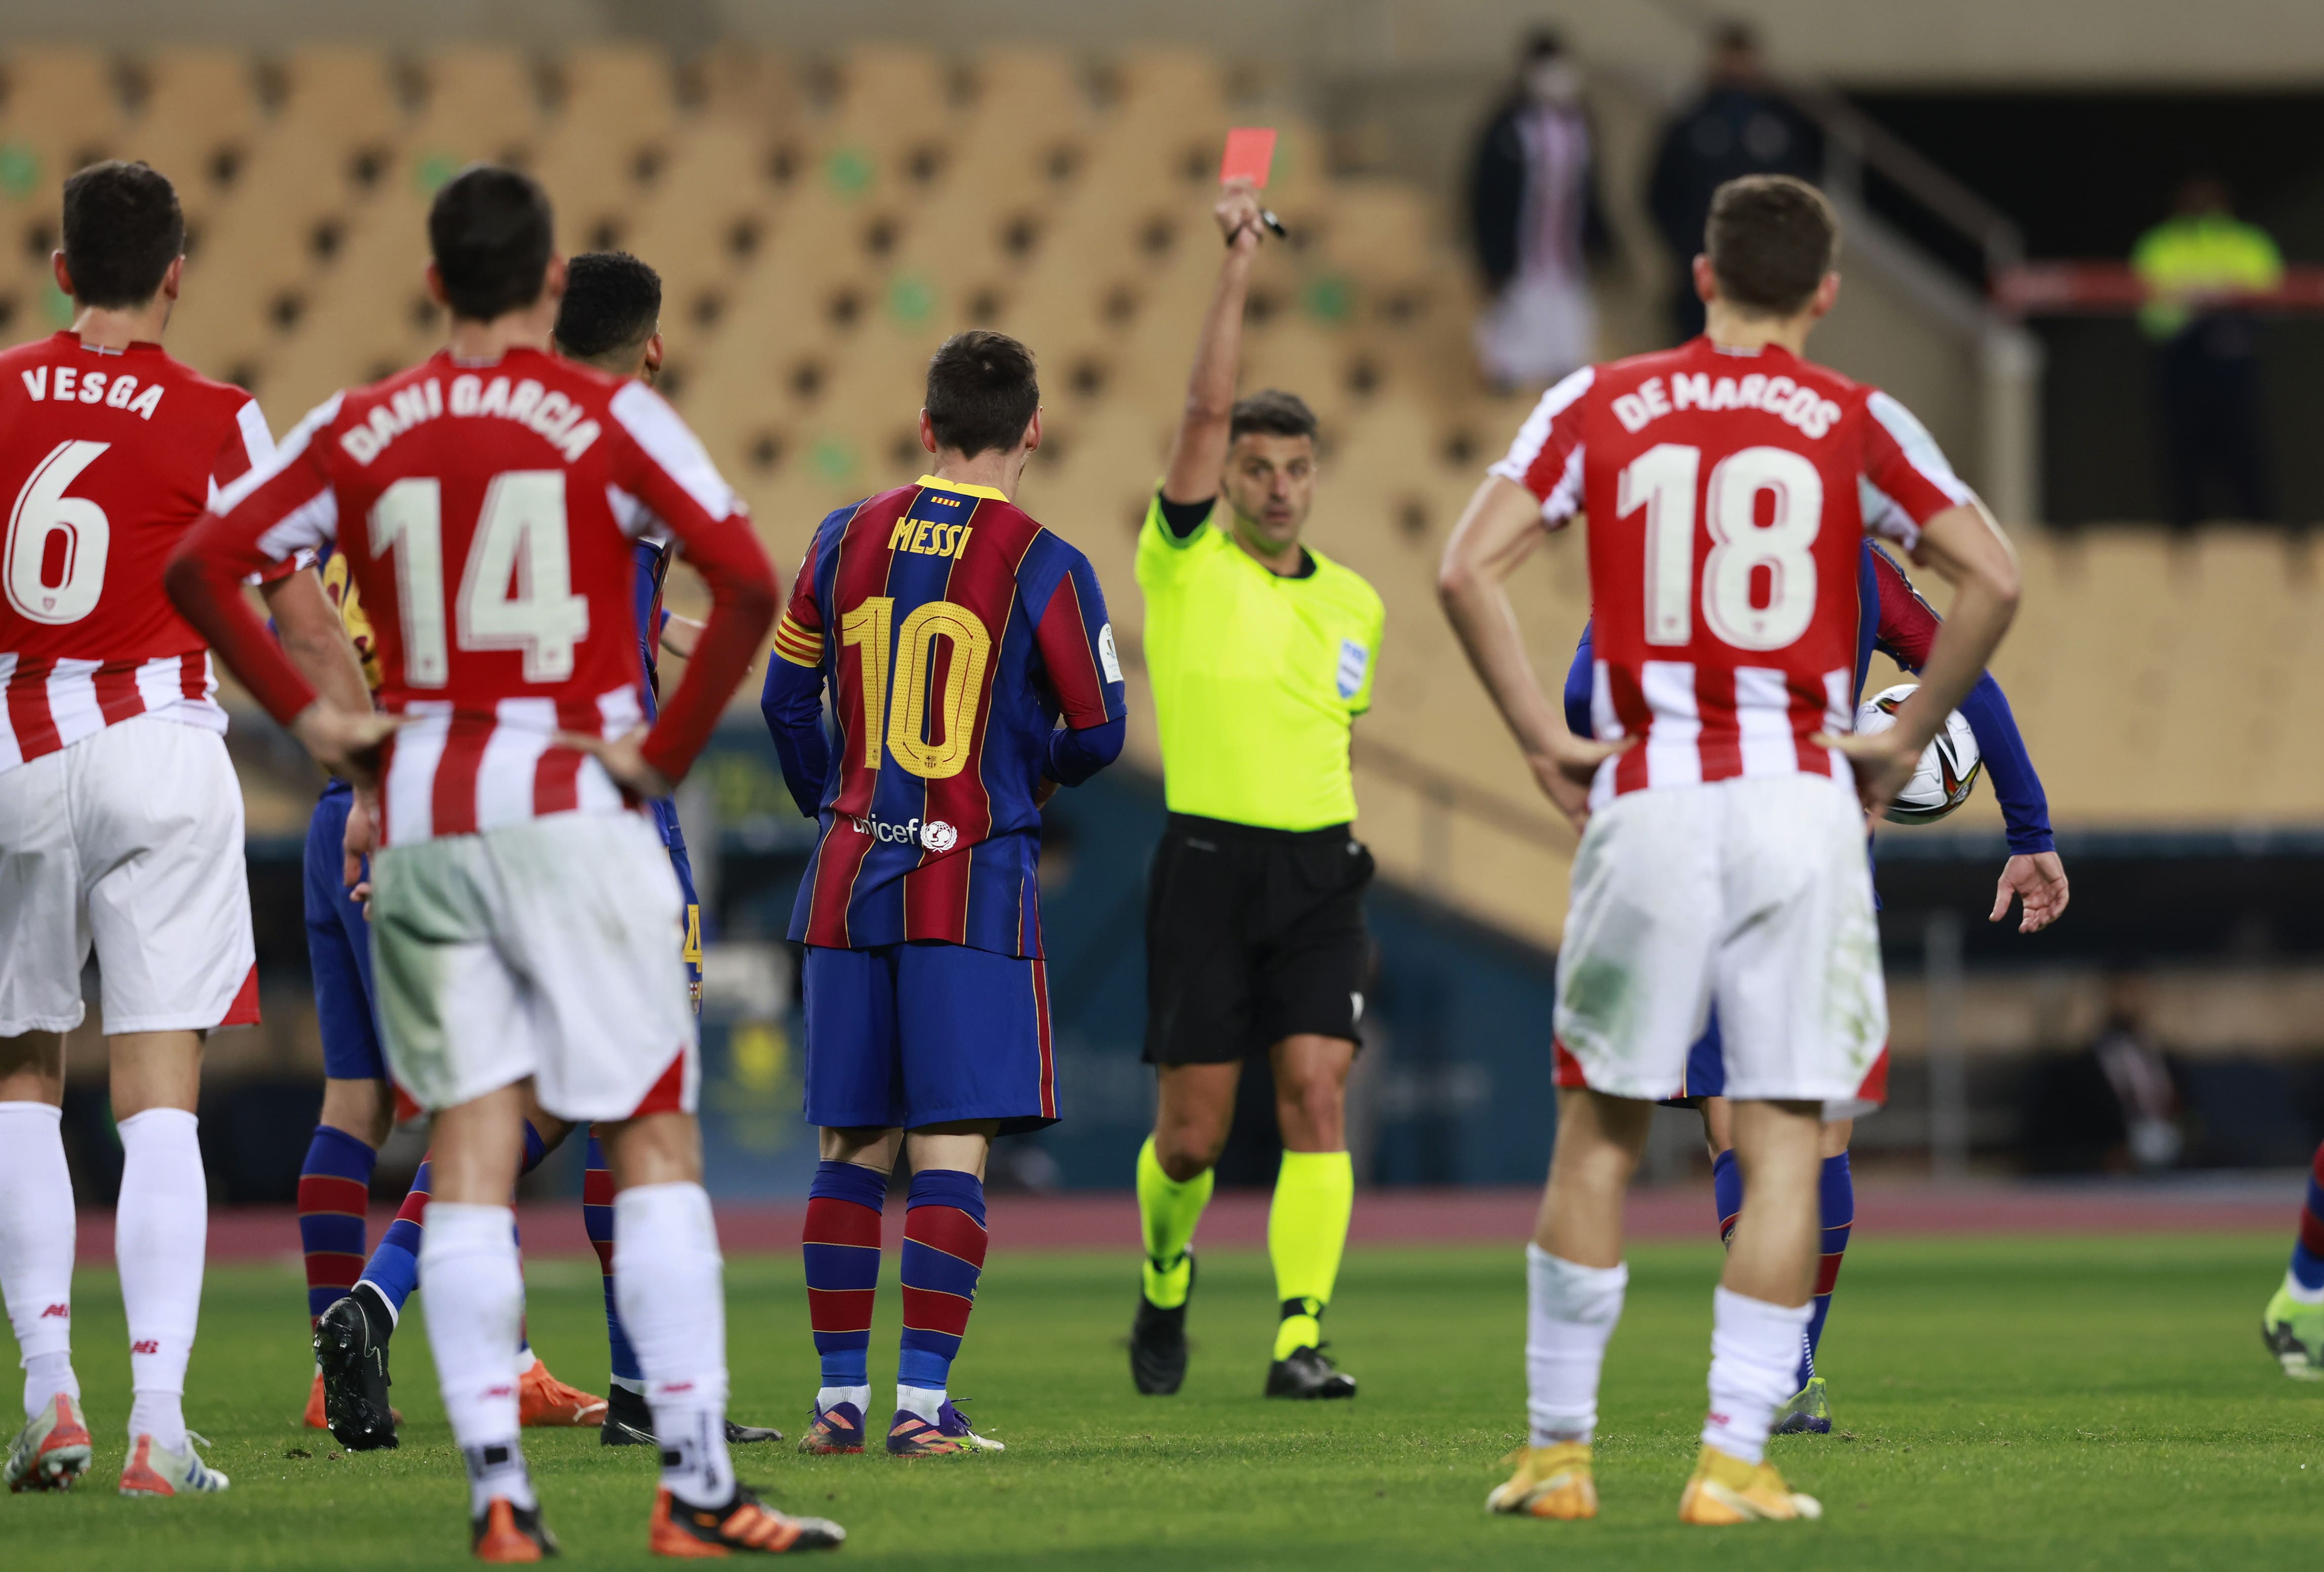 Leo Messi is shown the first red card of his Barcelona career late in the Super Cup final clash with Athletic Bilbao (image by REUTERS/Marcelo Del Pozo)